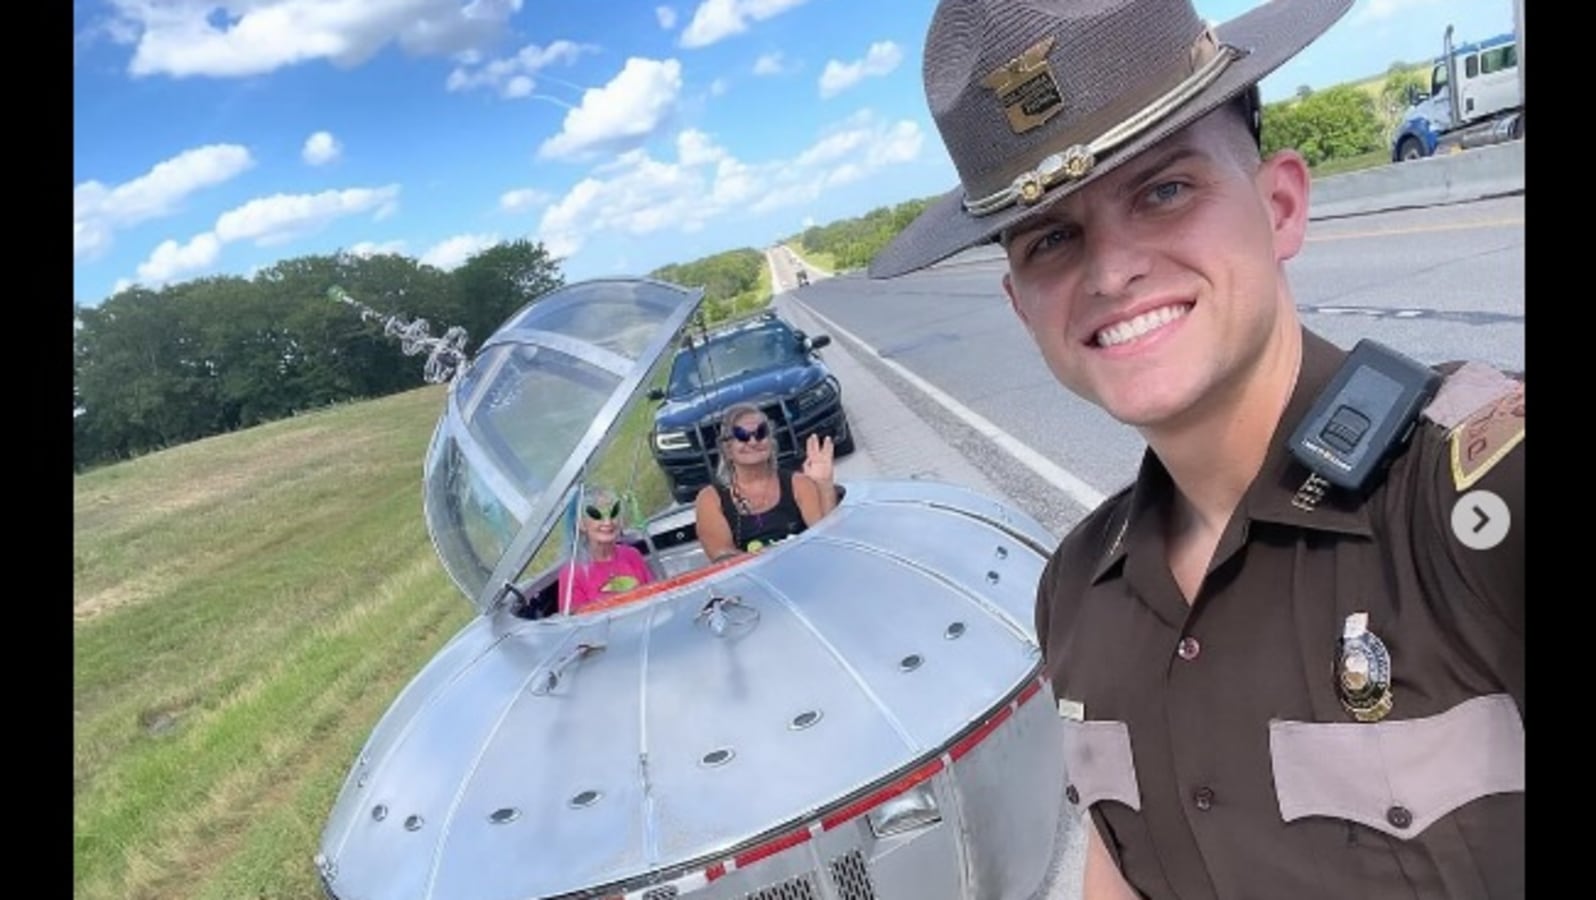 UFO ‘spotted’ in USA? Oklahoma Highway Patrol trooper takes selfie with unique vehicle